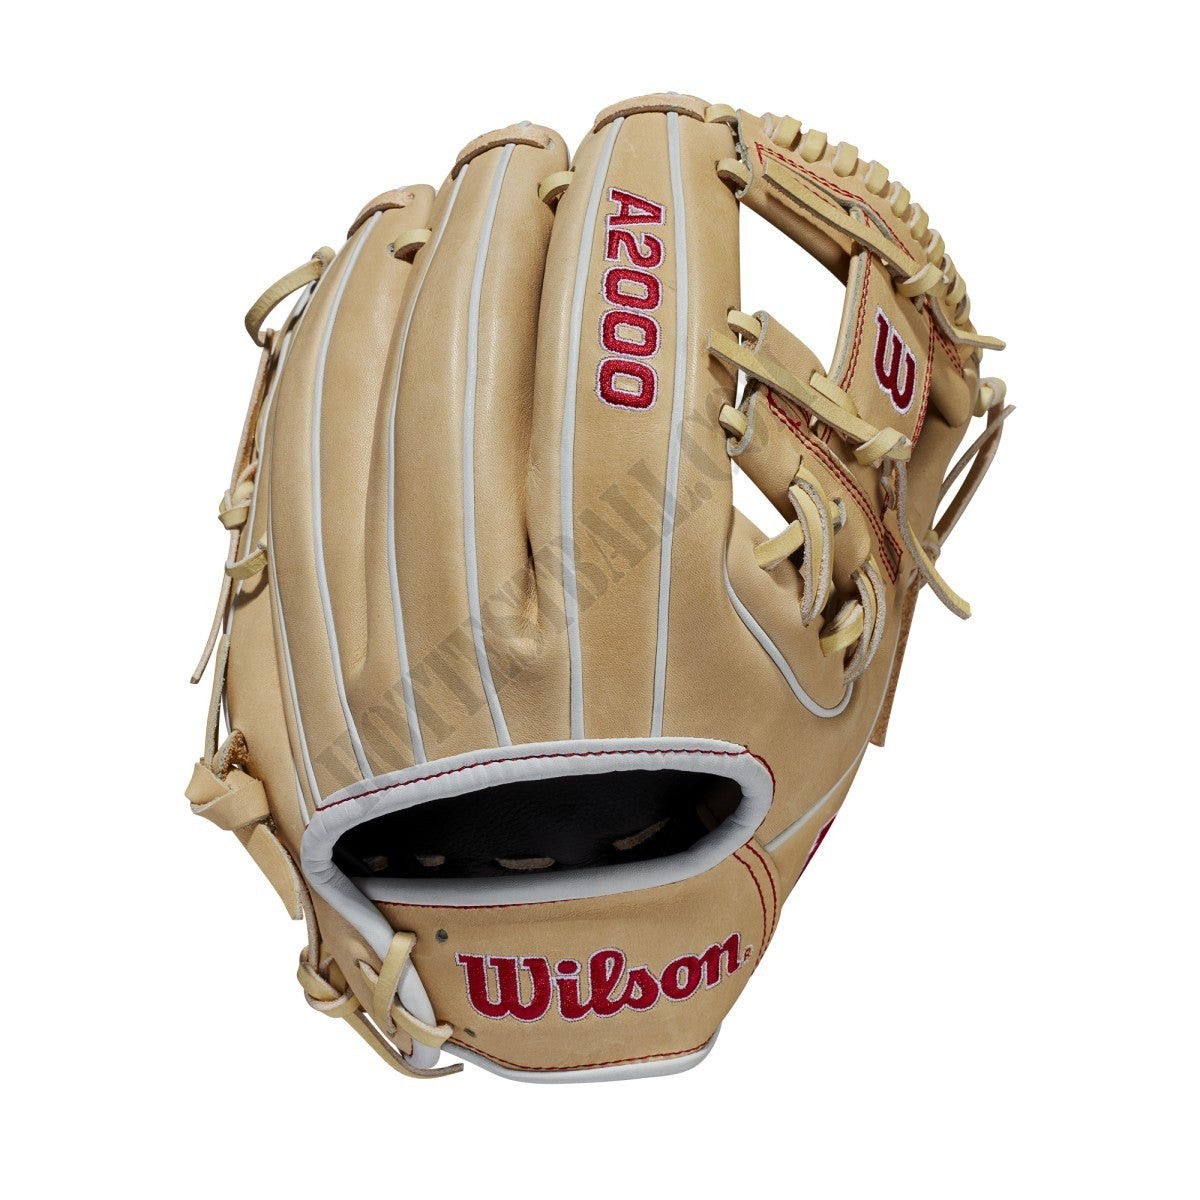 2021 A2000 1786 Bronco 11.5" Infield Baseball Glove - Right Hand Throw ● Wilson Promotions - -1